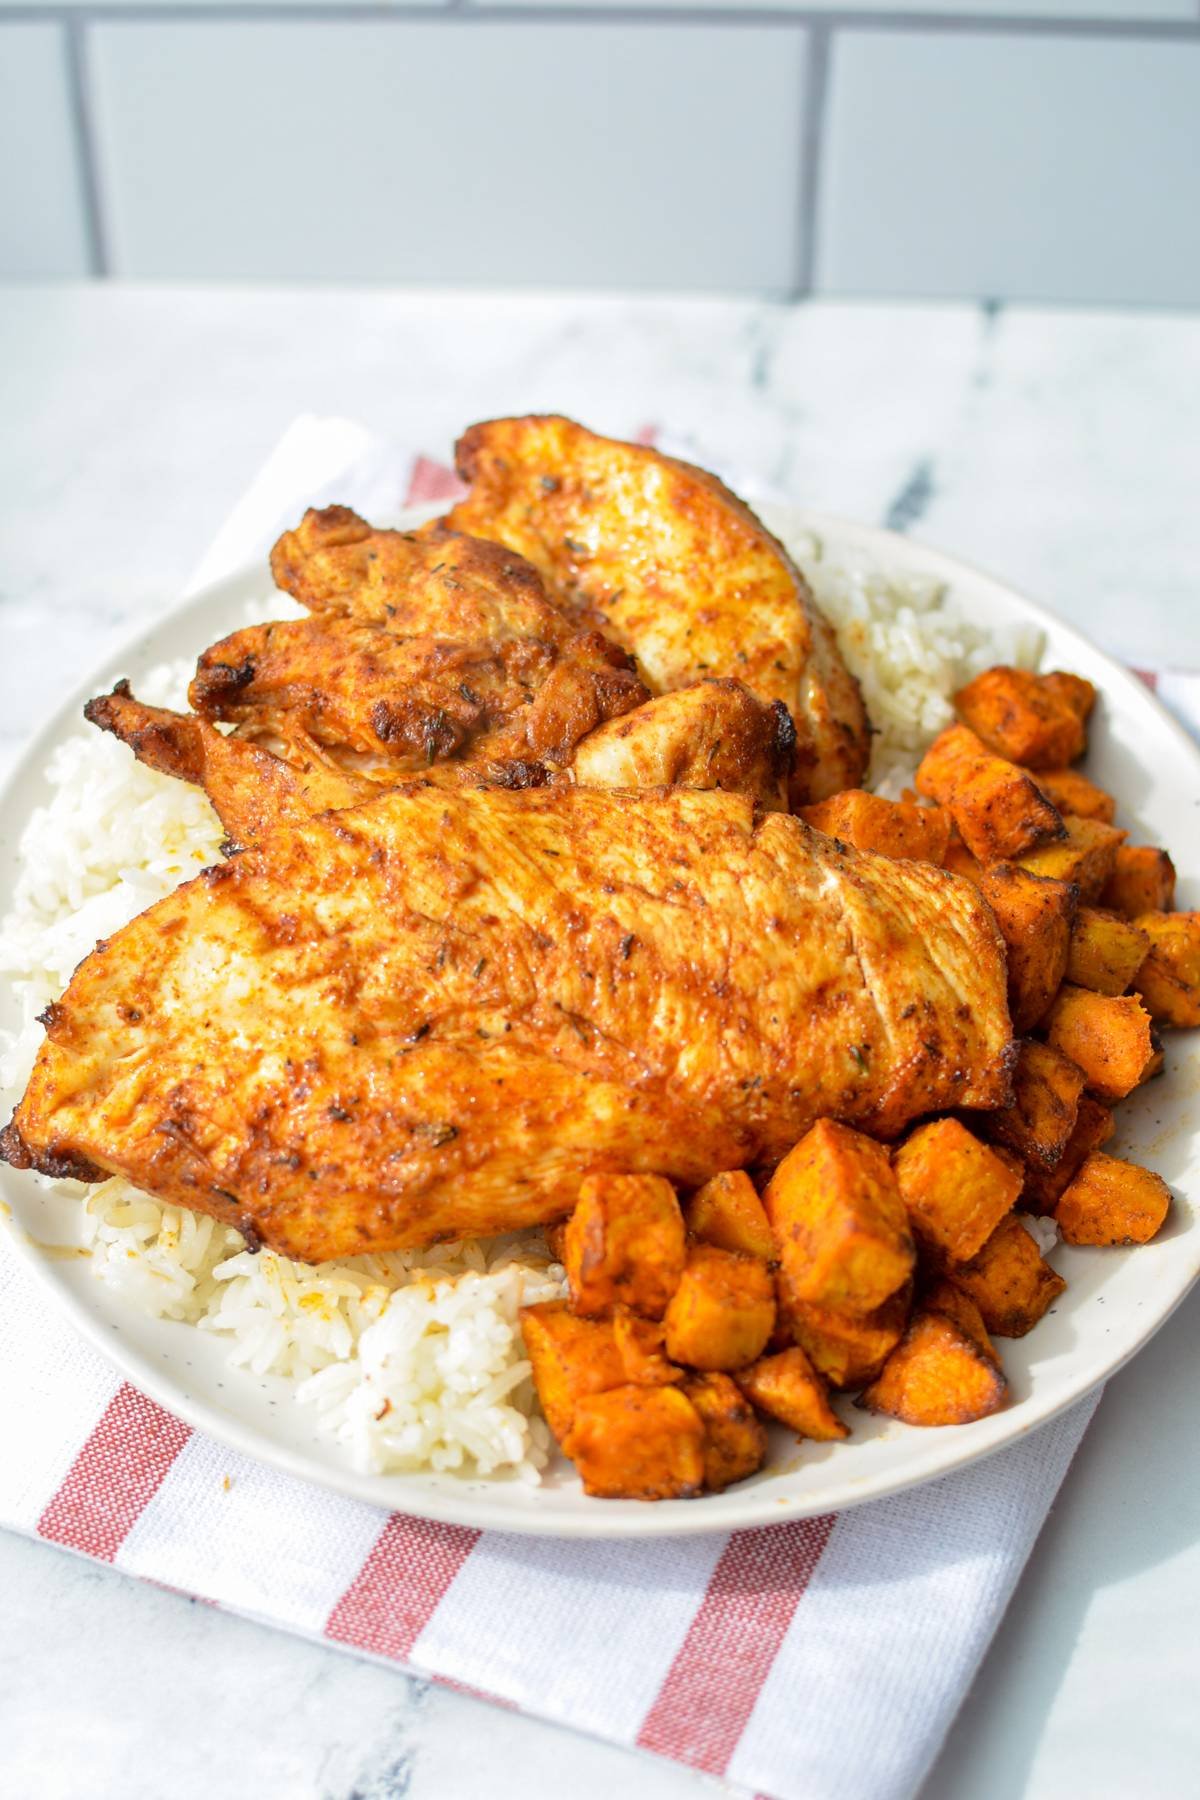 A plate filled with chicken, rice, and sweet potato cubes.